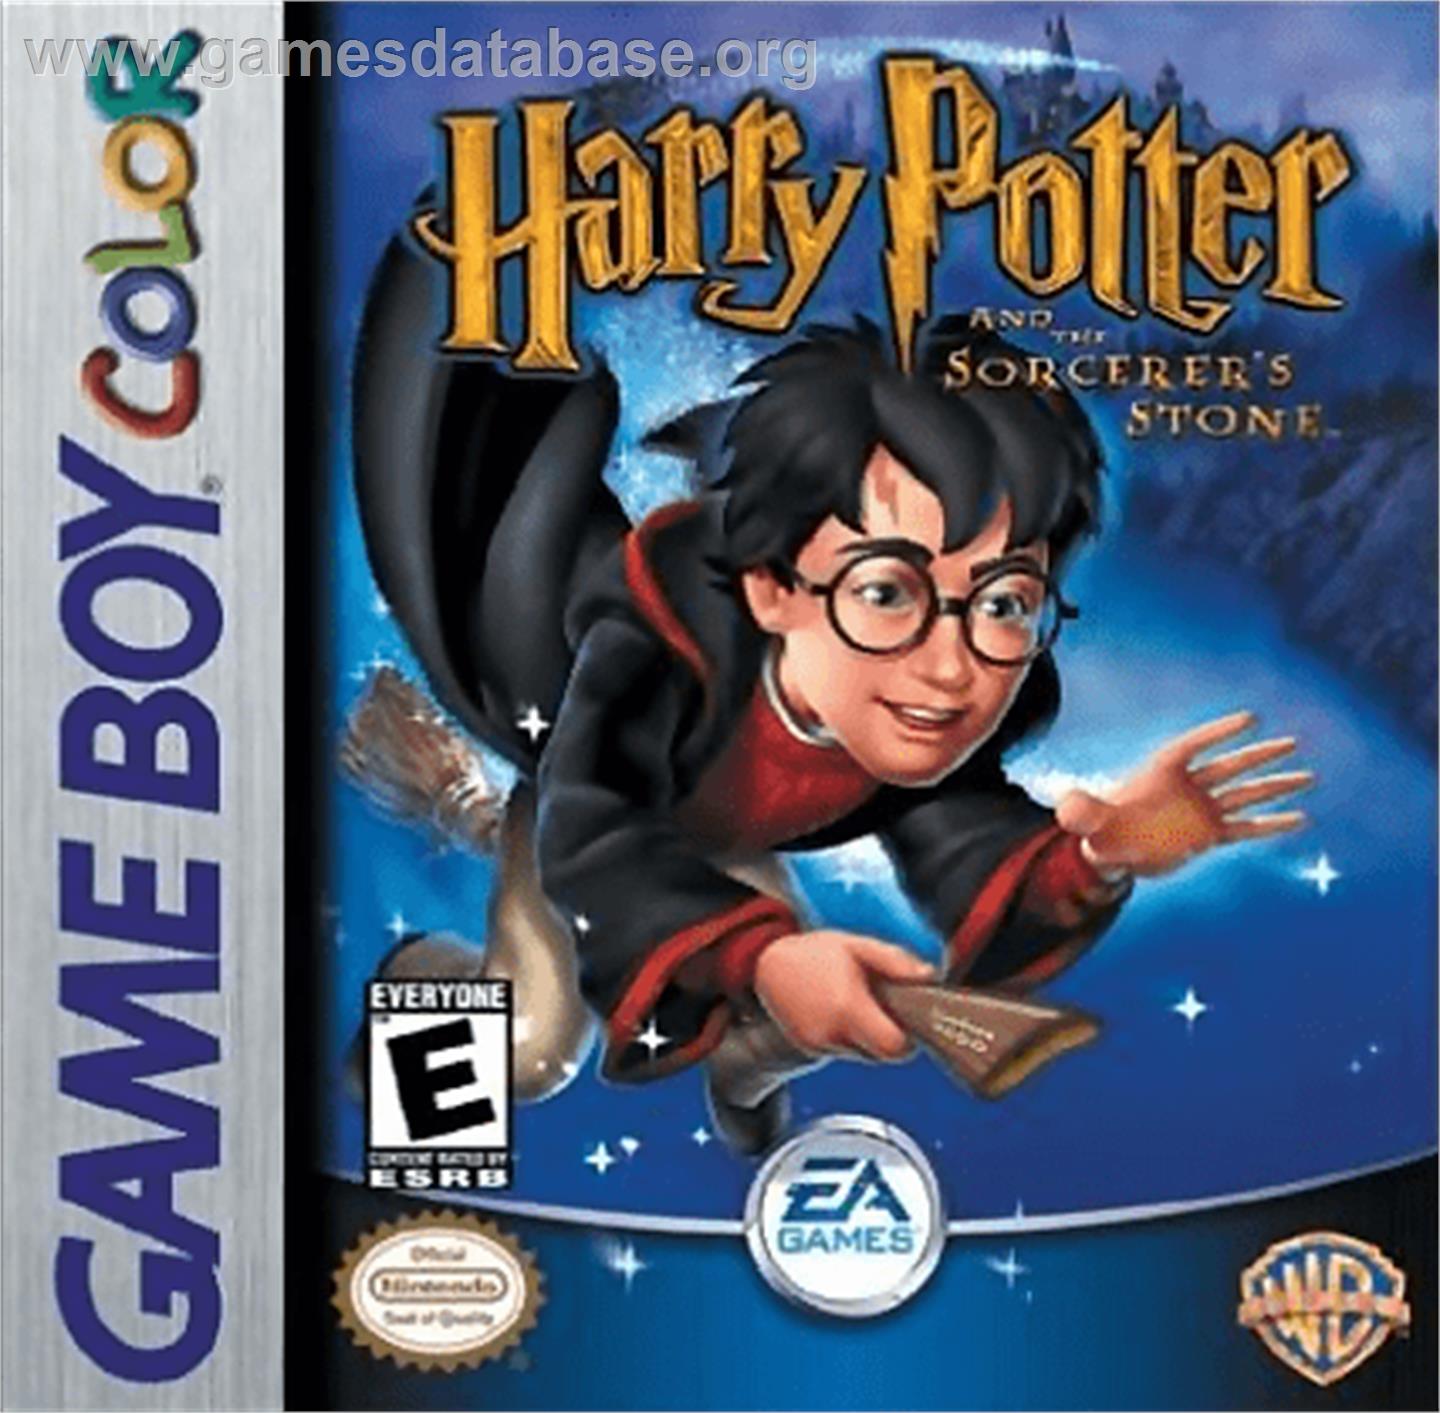 Harry Potter and the Sorcerer's Stone - Nintendo Game Boy Color - Artwork - Box